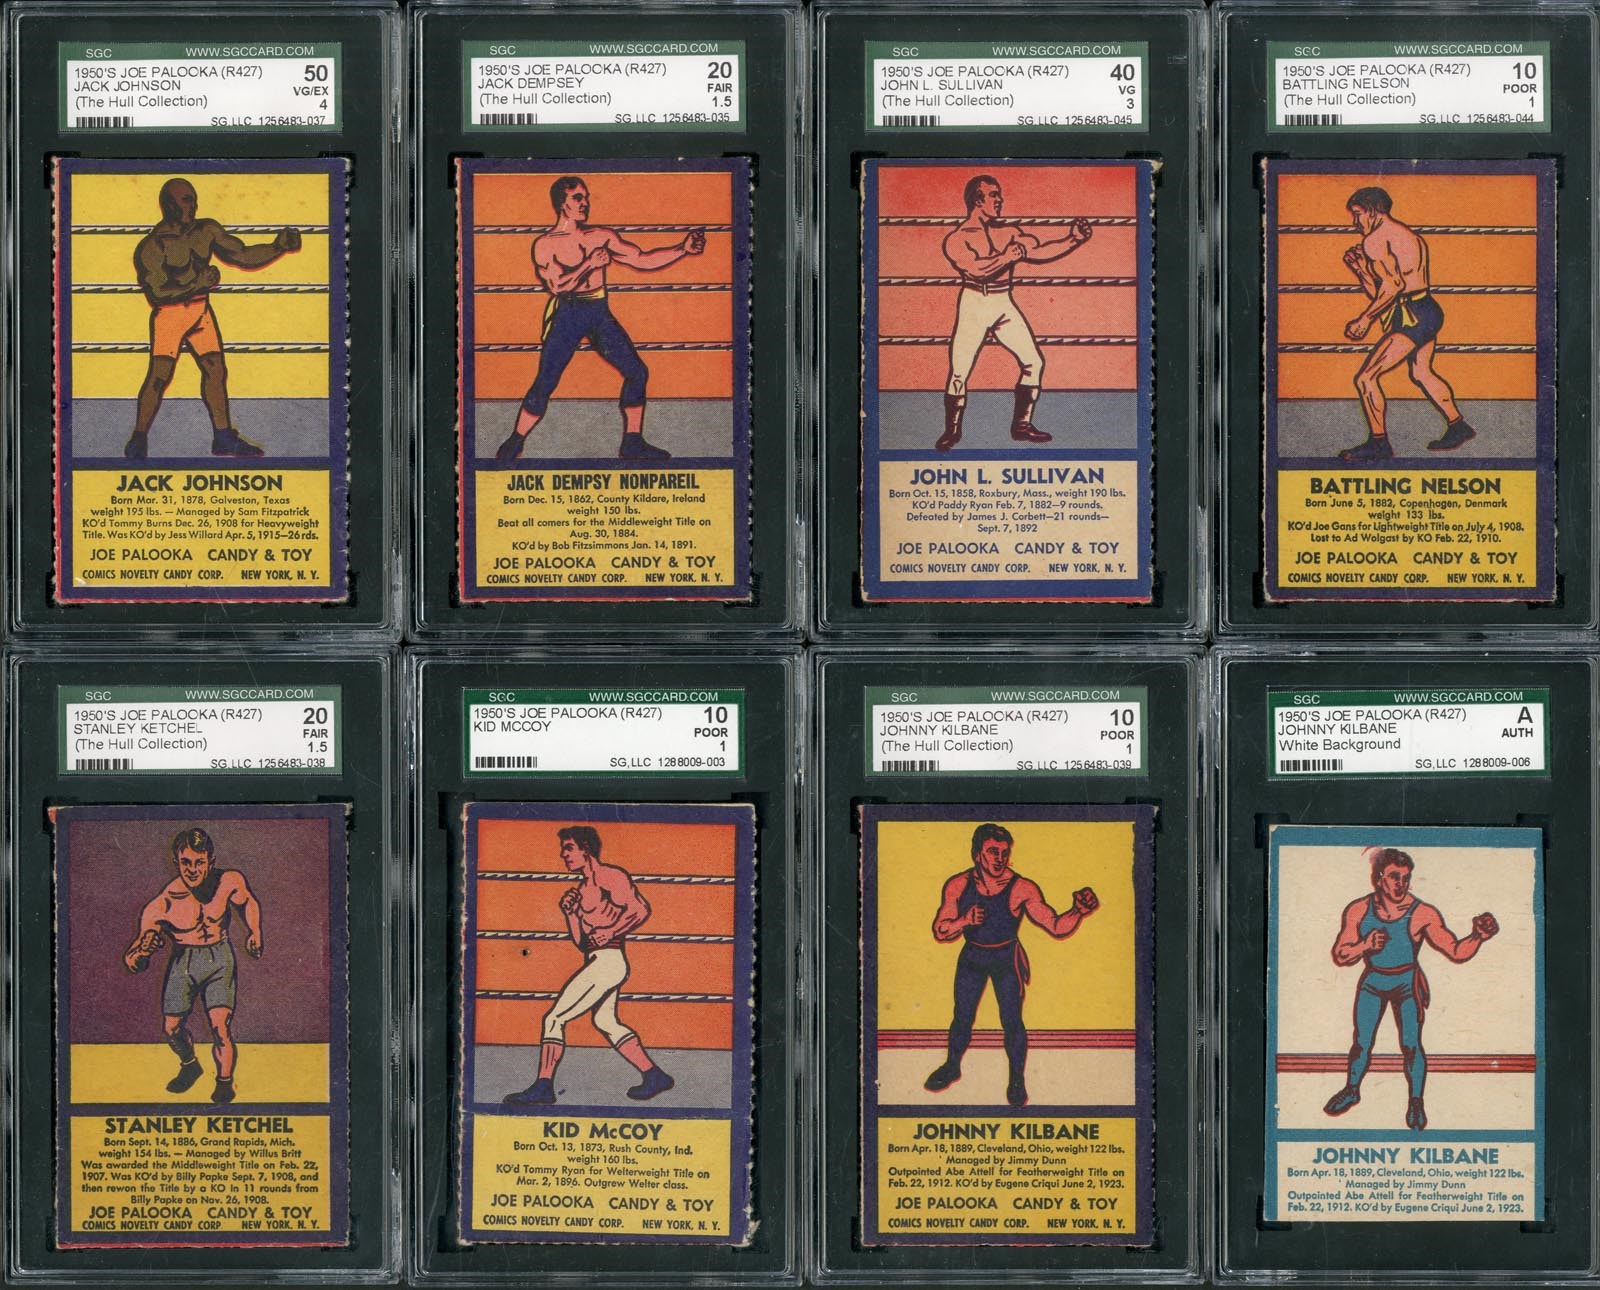 - 1950's Joe Palooka R427 Collection - Complete Set of 12, plus Two Duplicates Cards (SGC Graded)